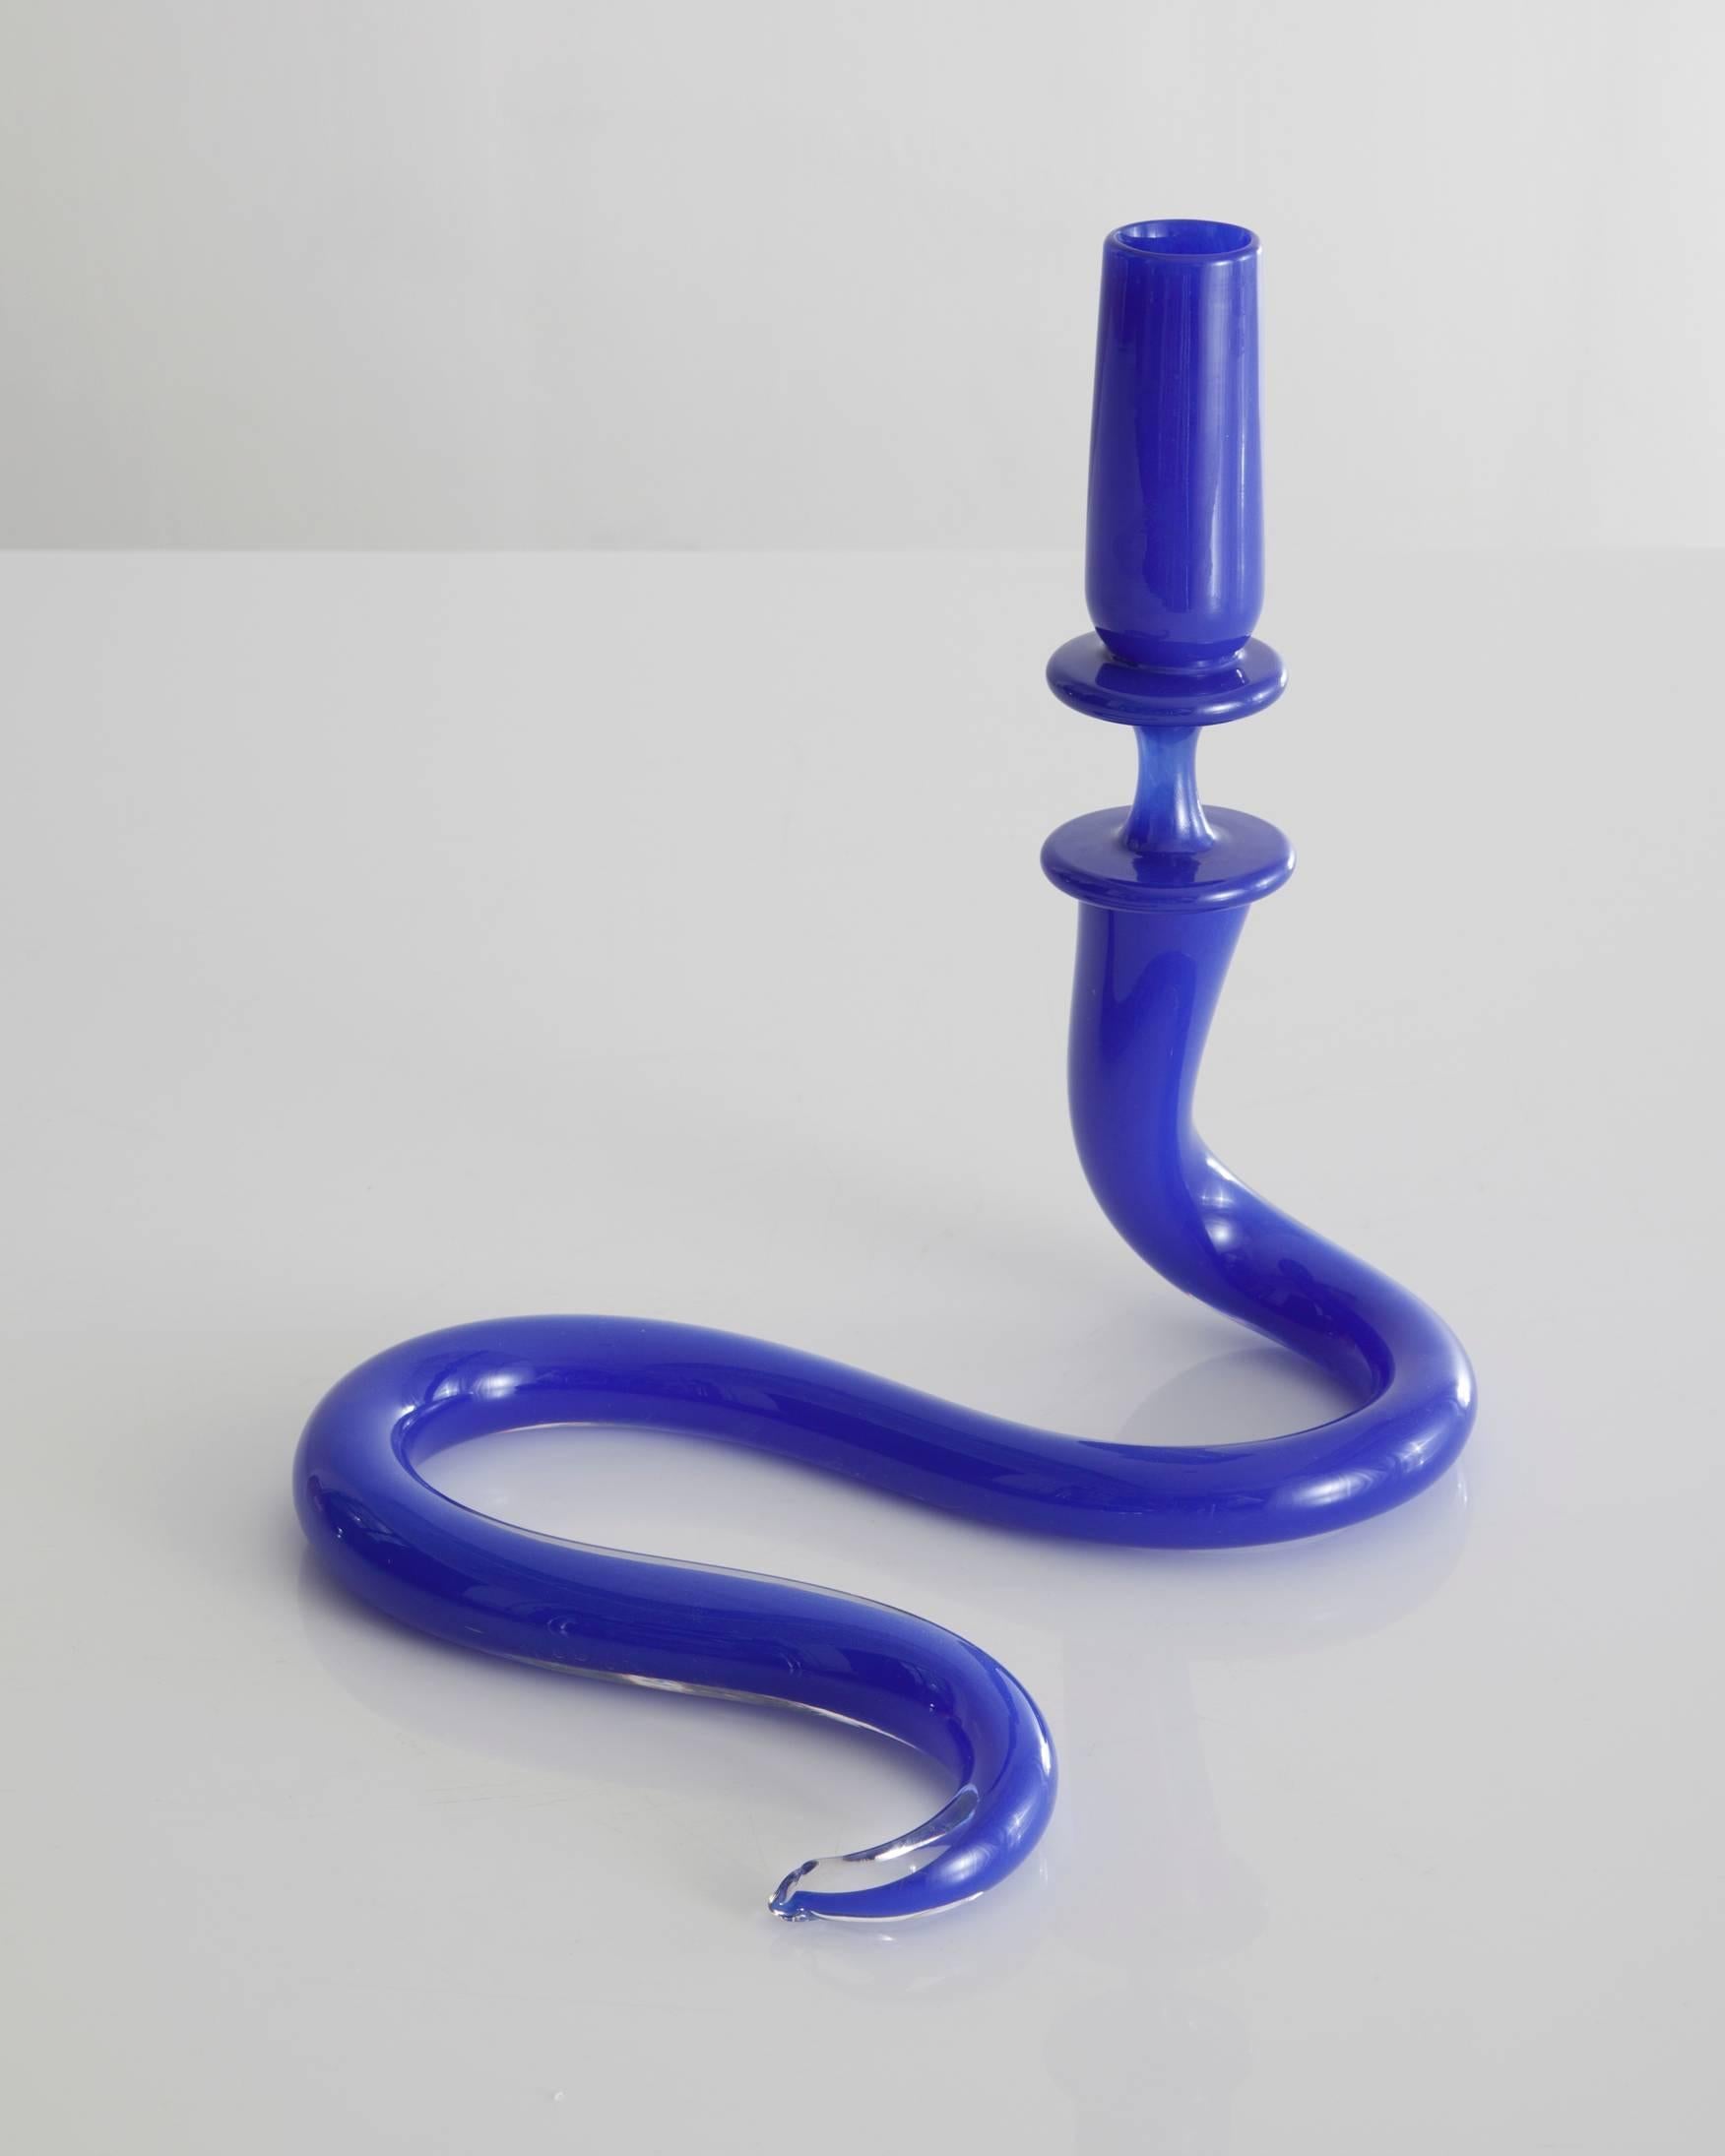 Unique single serpentine light sculpture in blue handblown glass. Designed and made by Jeff Zimmerman, USA, 2014.